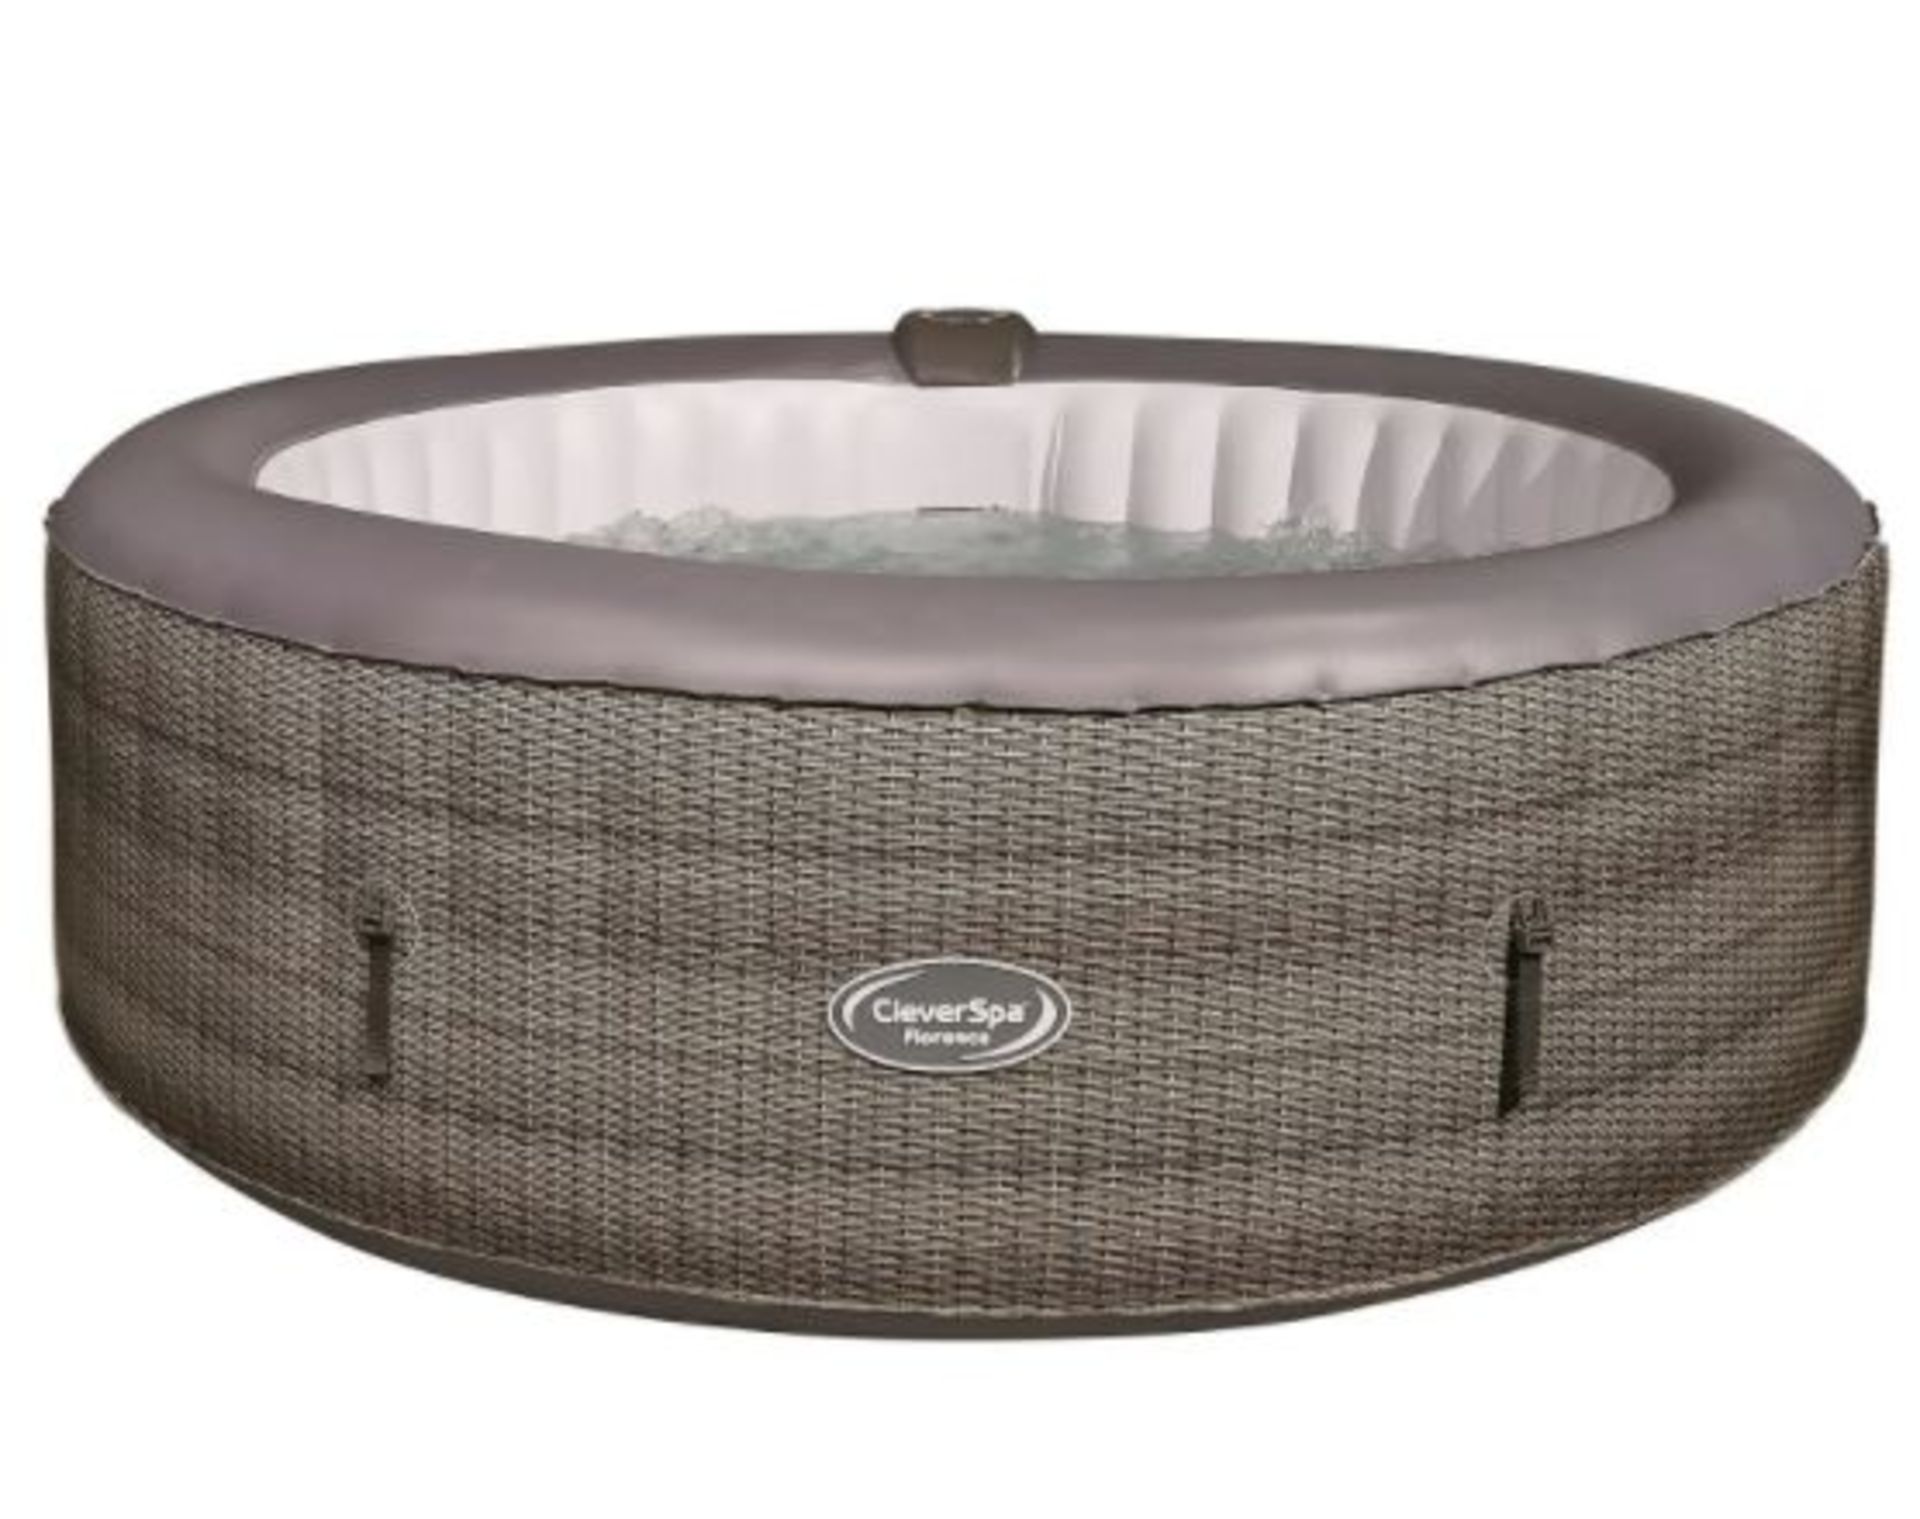 (R3B) 1x CleverSpa Florence 6 Person Hot Tub RRP £560. - Image 2 of 4